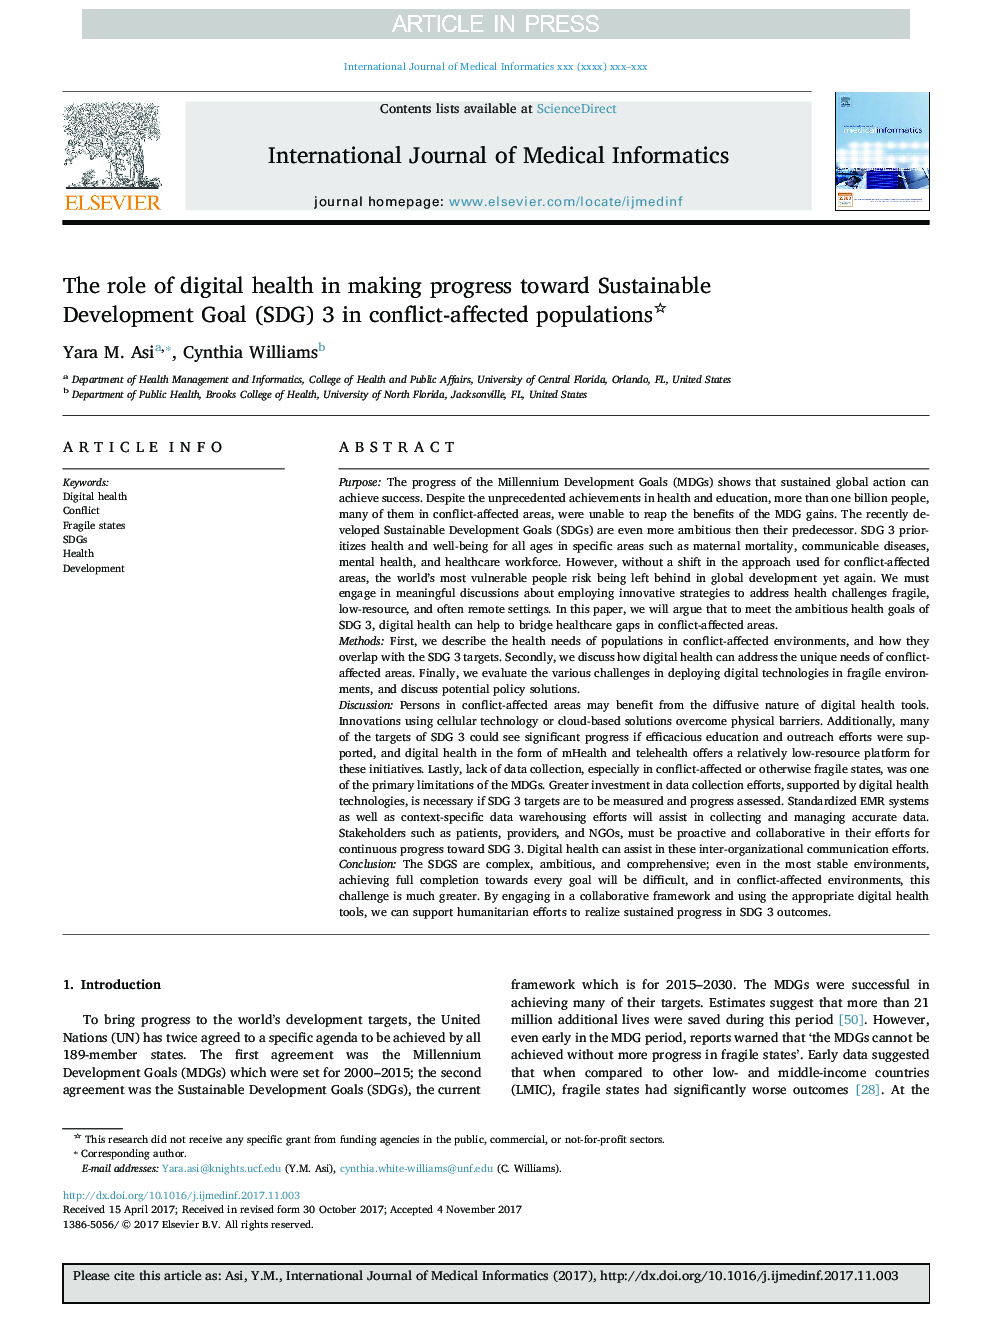 The role of digital health in making progress toward Sustainable Development Goal (SDG) 3 in conflict-affected populations